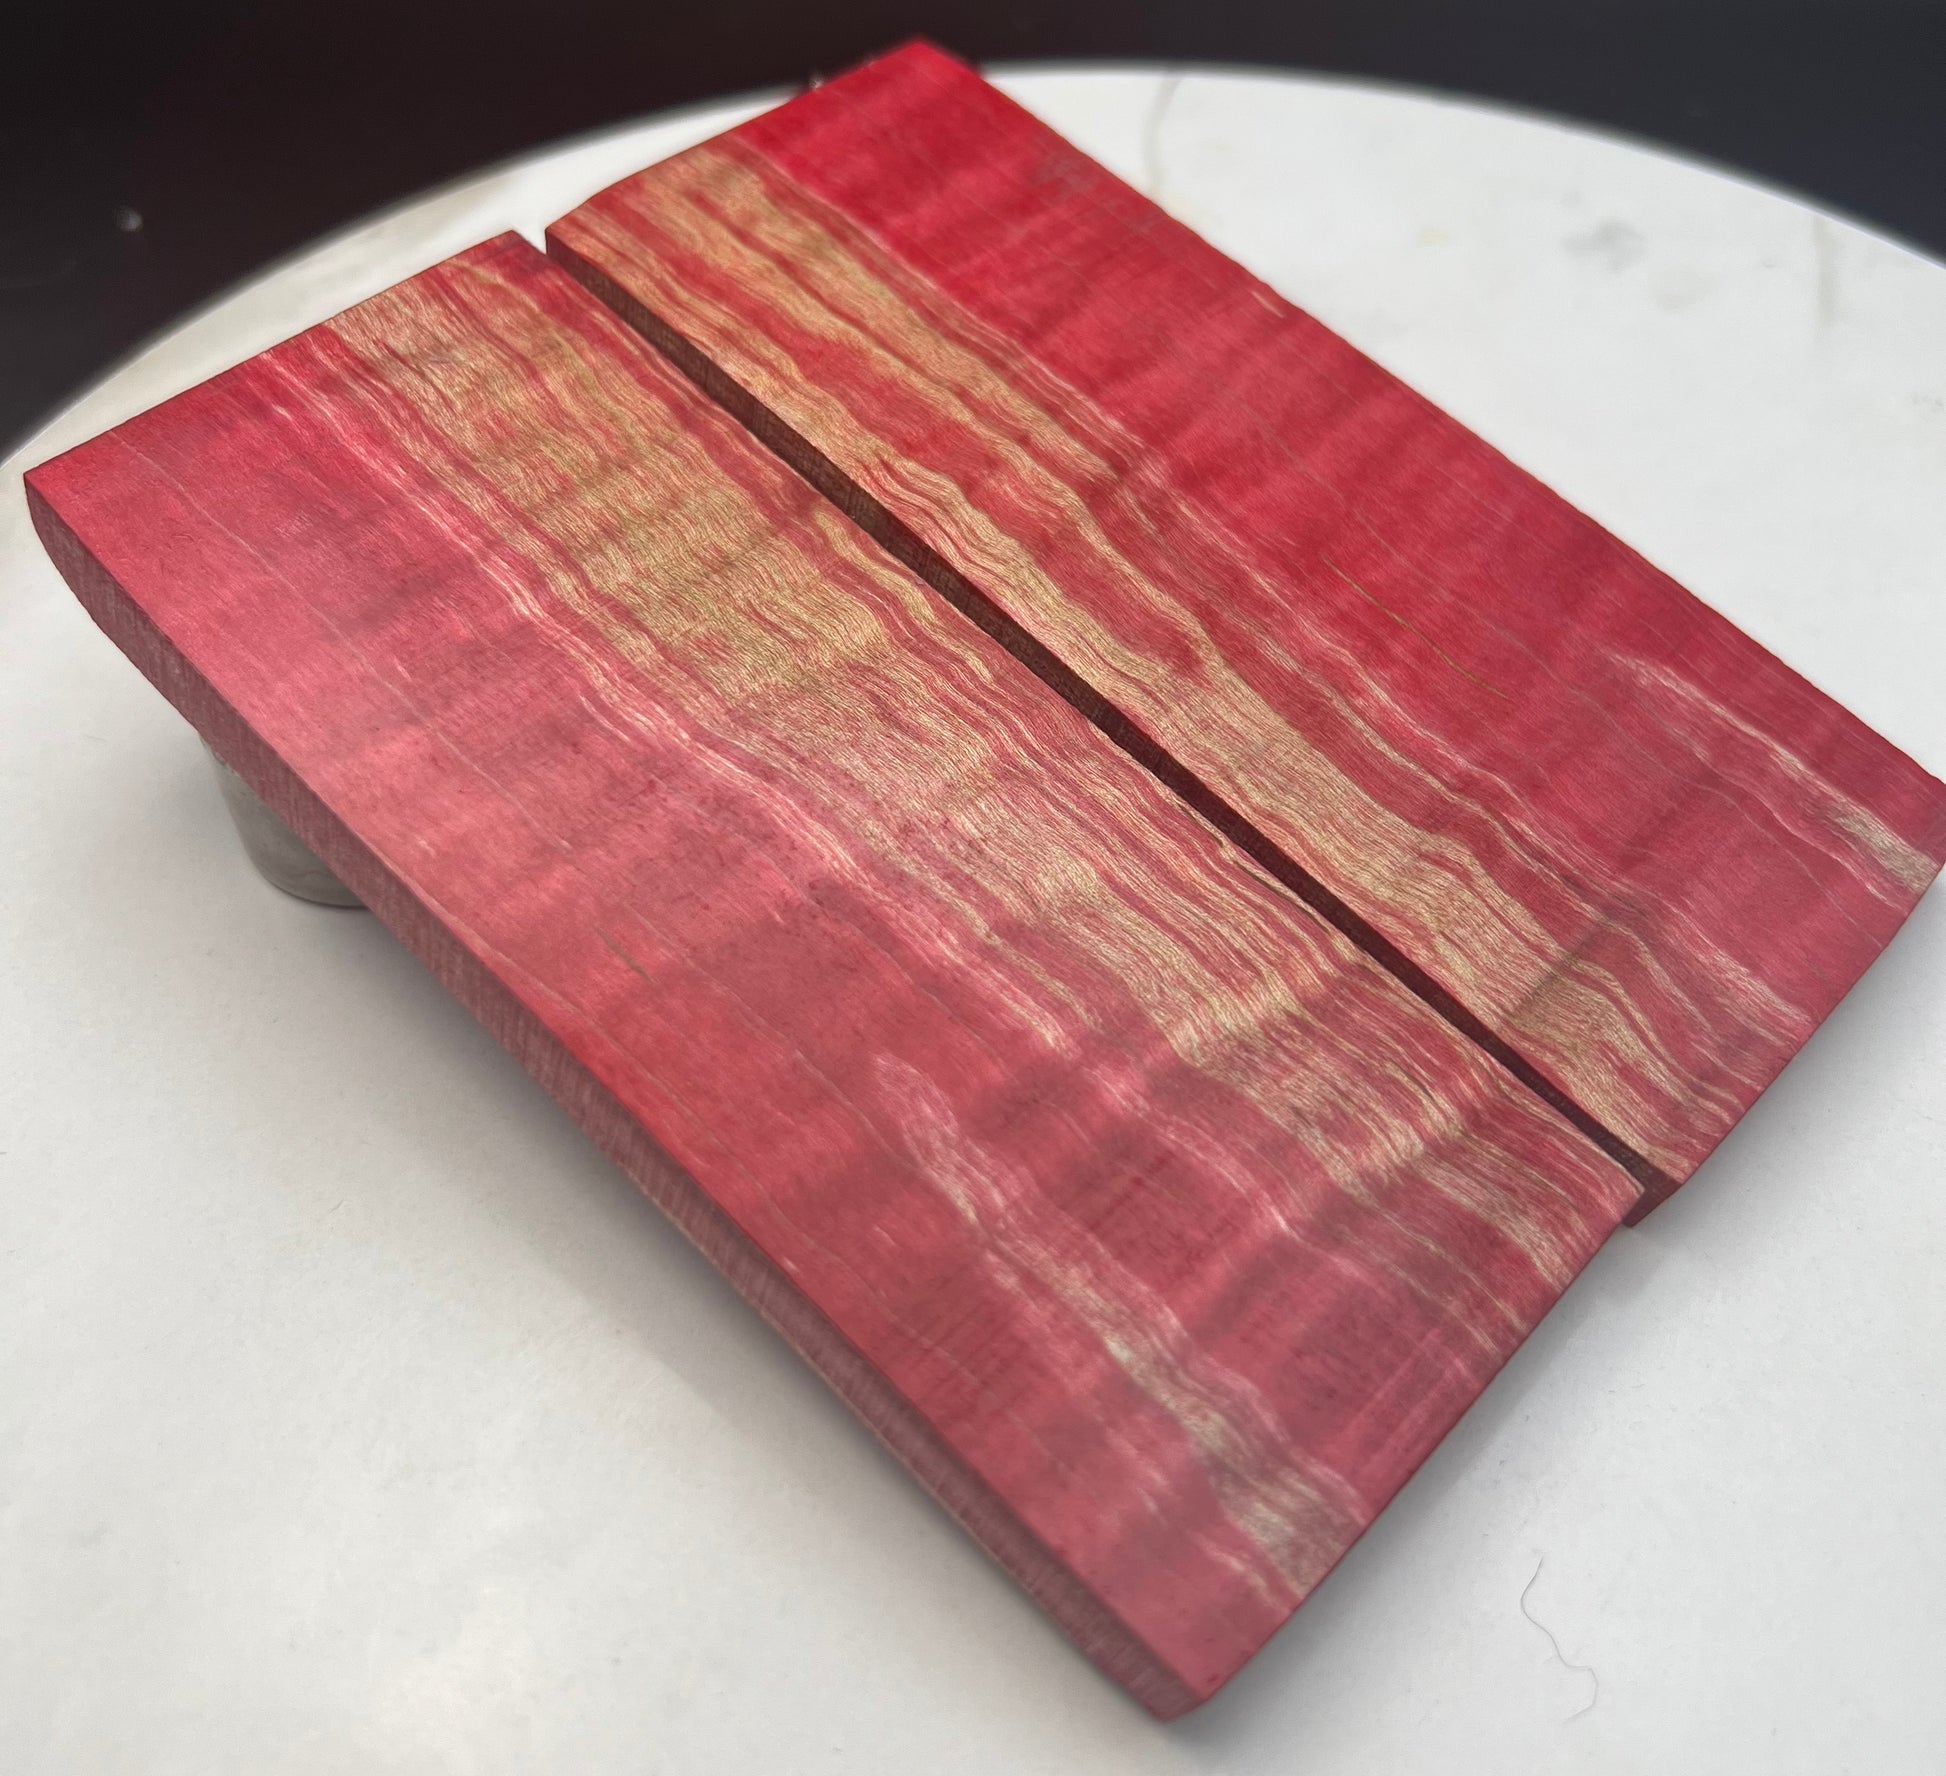 Stabilized Curly Maple knife Scales Bright Red